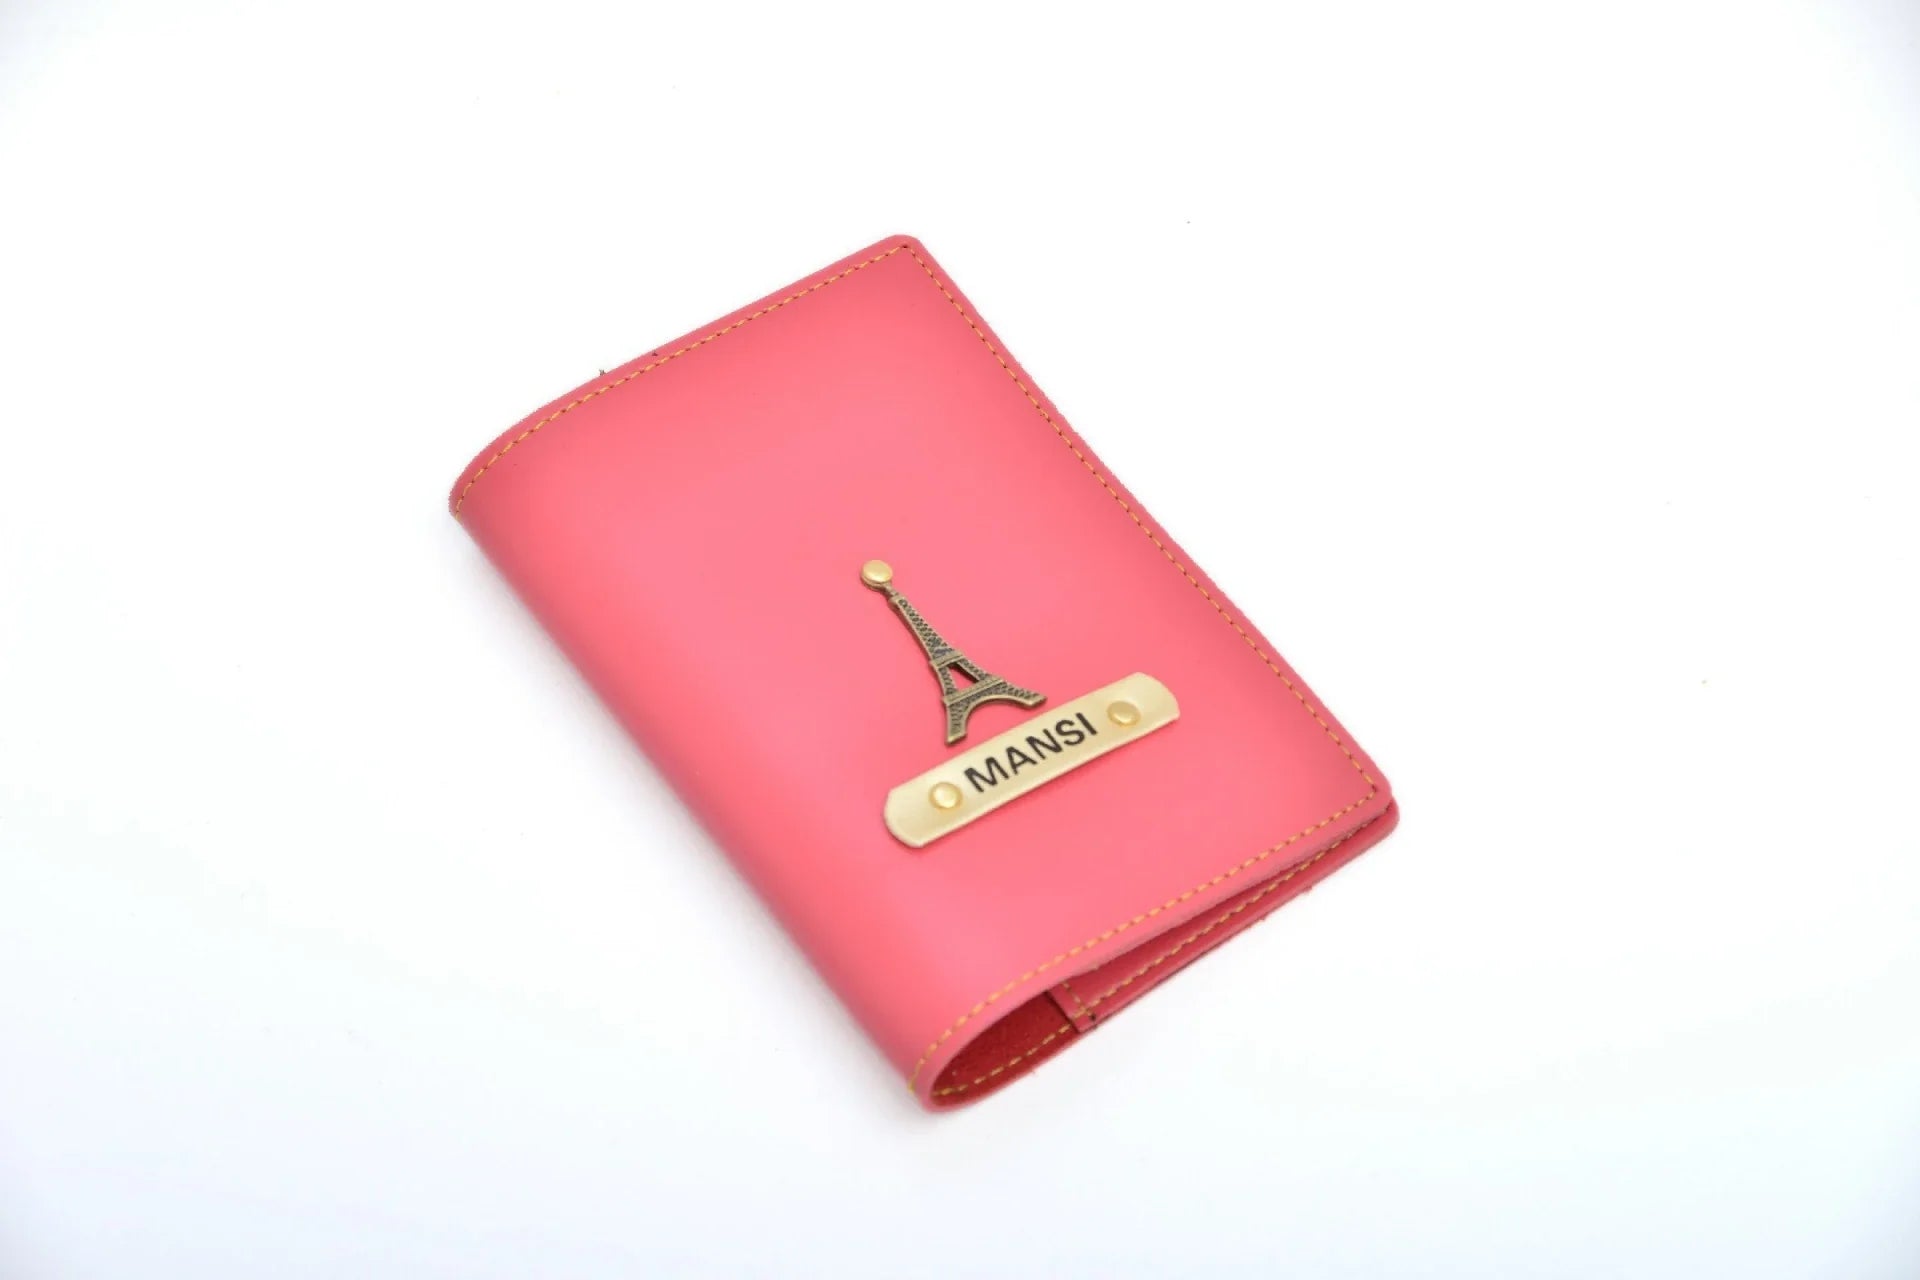 couple-twinning-passport-combo-2-pcs-1-customized-best-gift-for-boyfriend-girlfriend.Make the most awesome personalized passport covers yours, from the best personalized gifting store in India. With preium quality and umatched materials, a 100% customer satisfaction is always guaranteed just at Your Gift Studio.